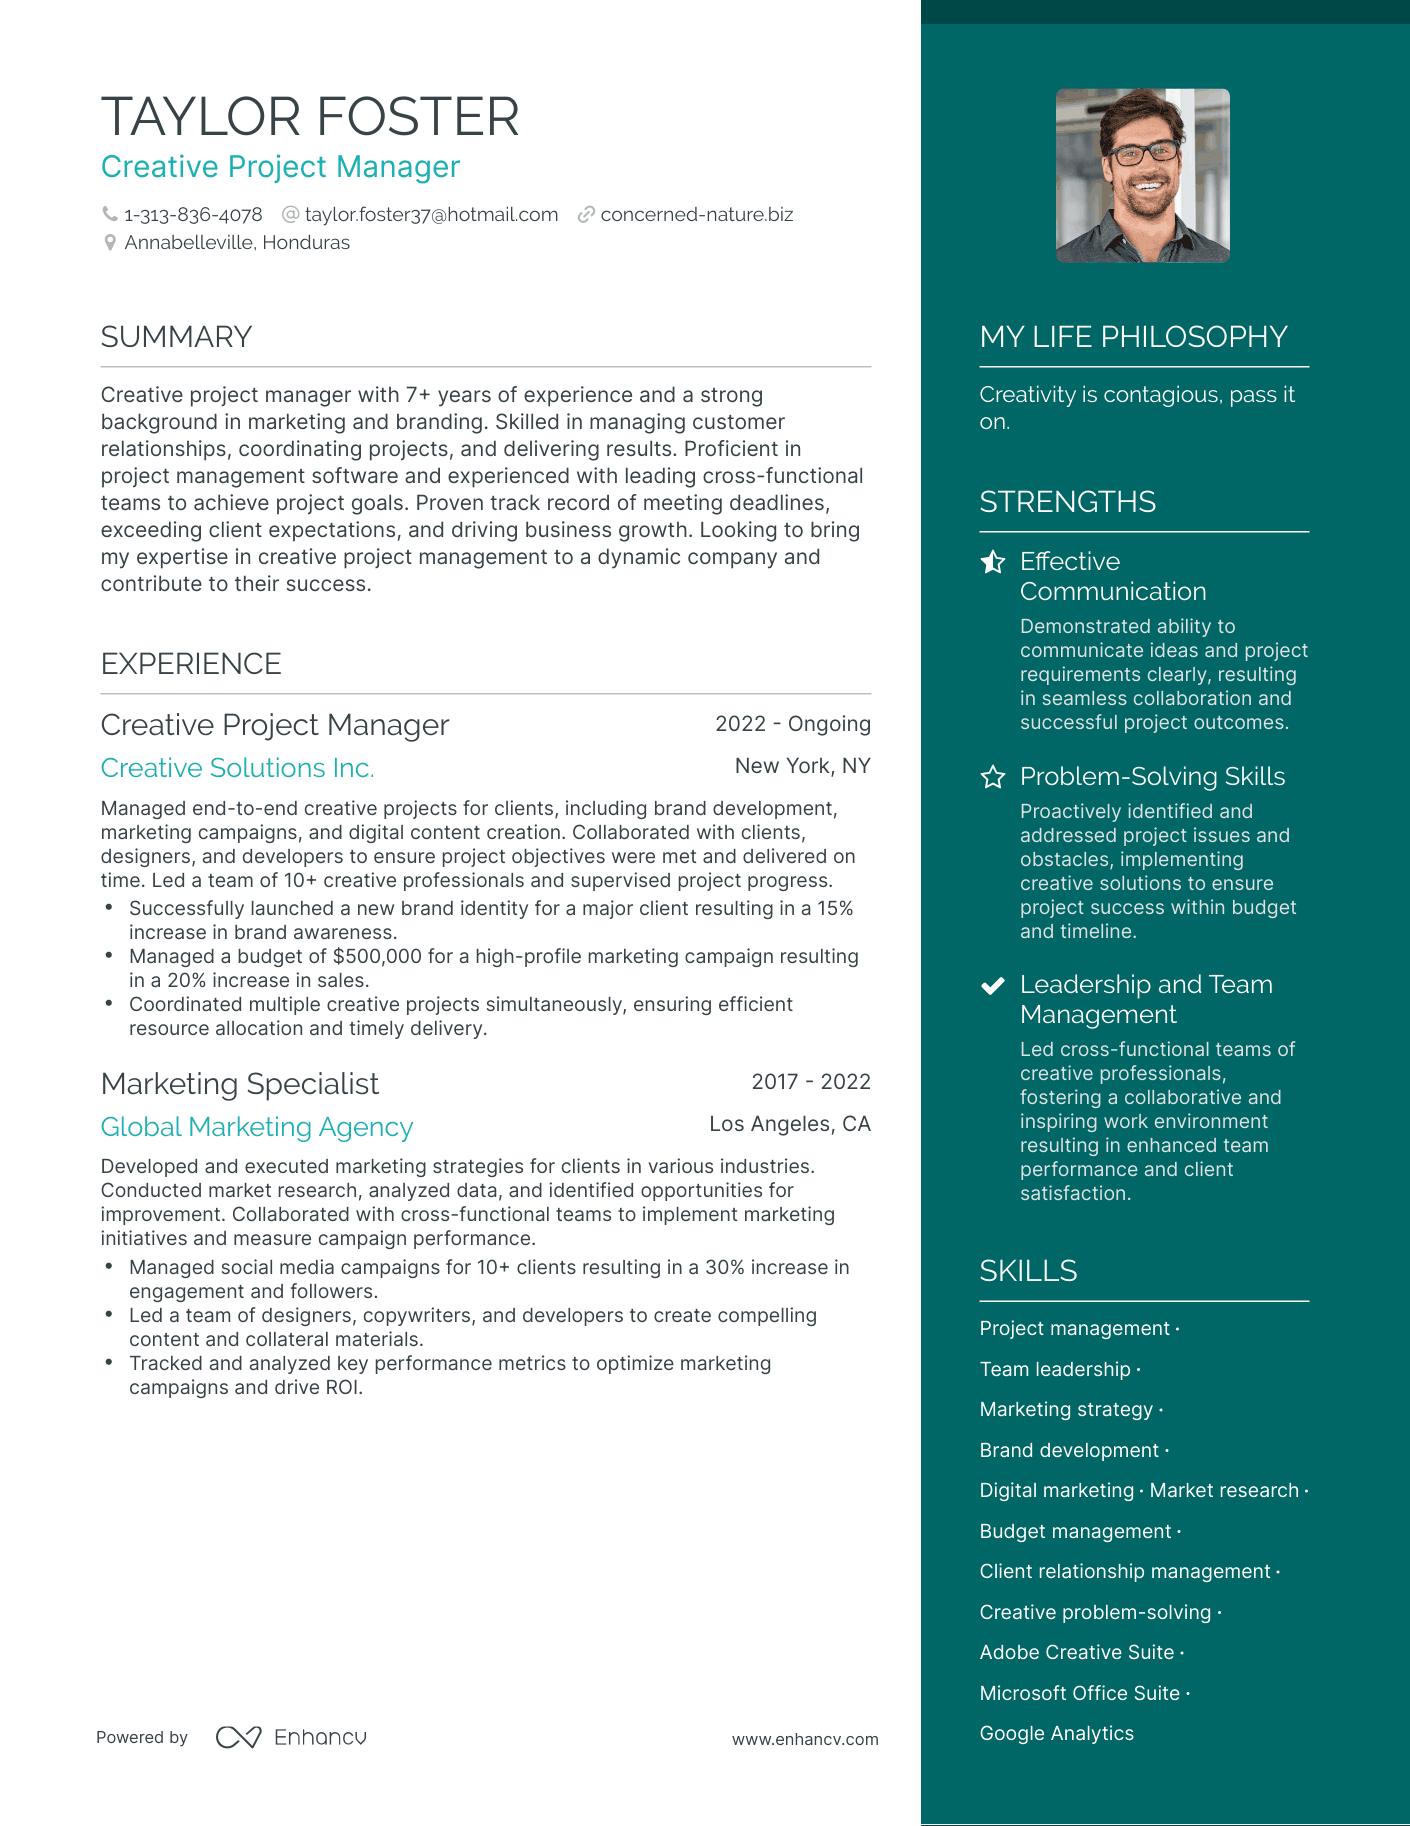 Creative Project Manager resume example